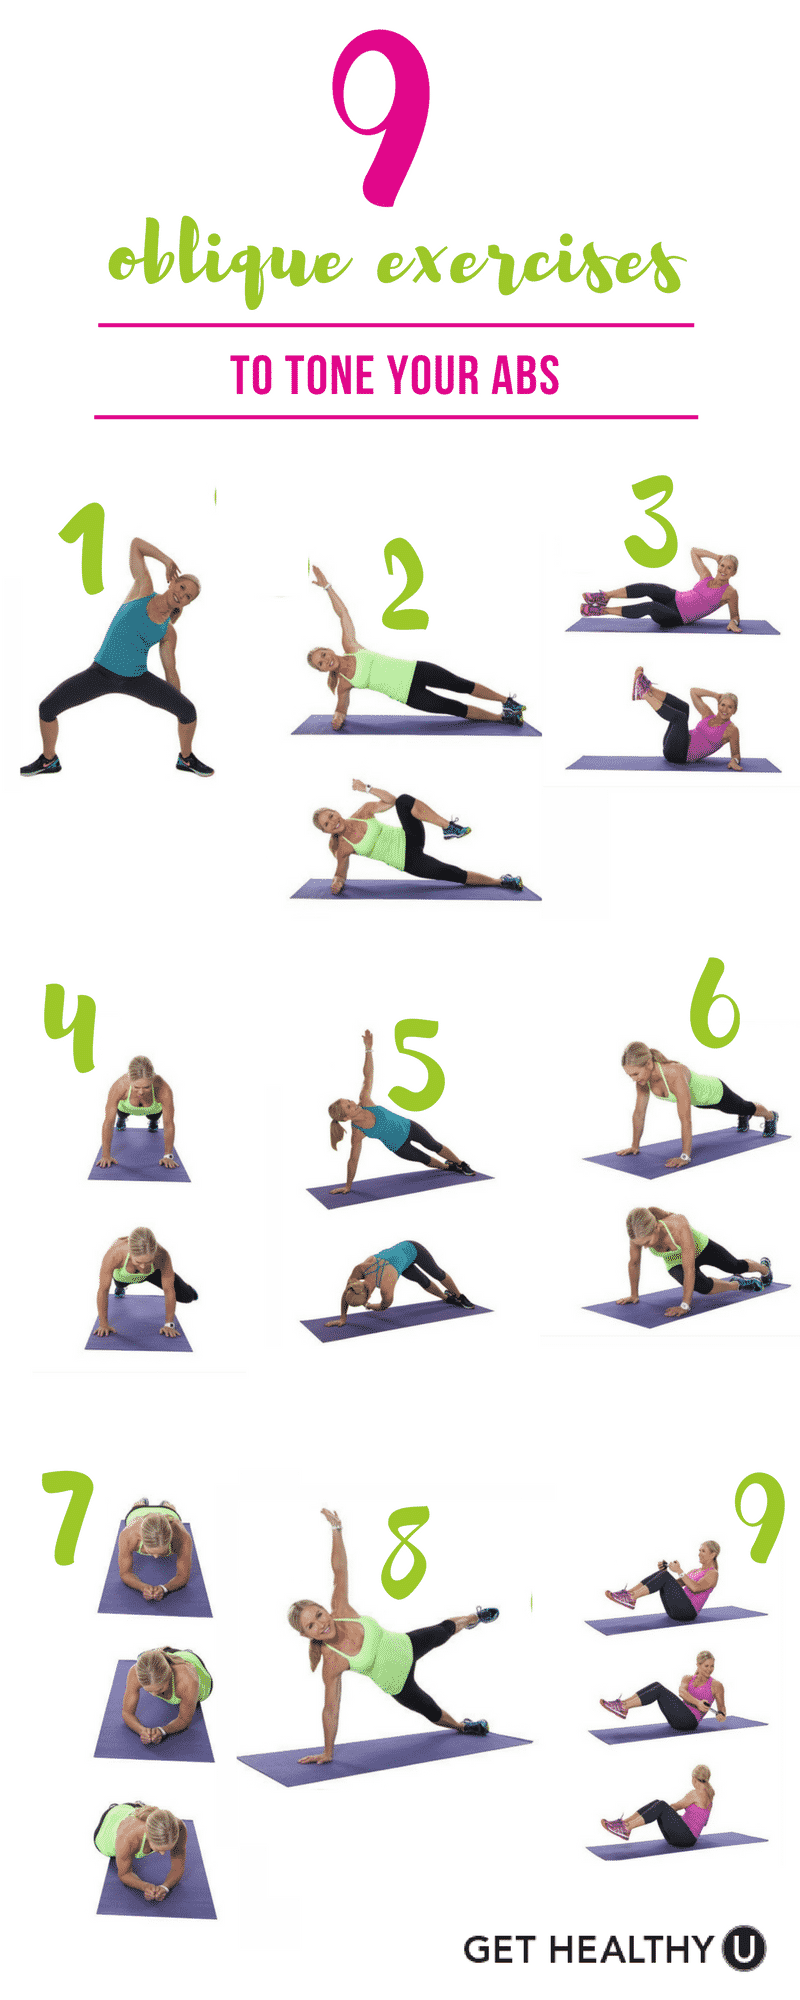 Check out our 9 oblique exercises to tone those abs!